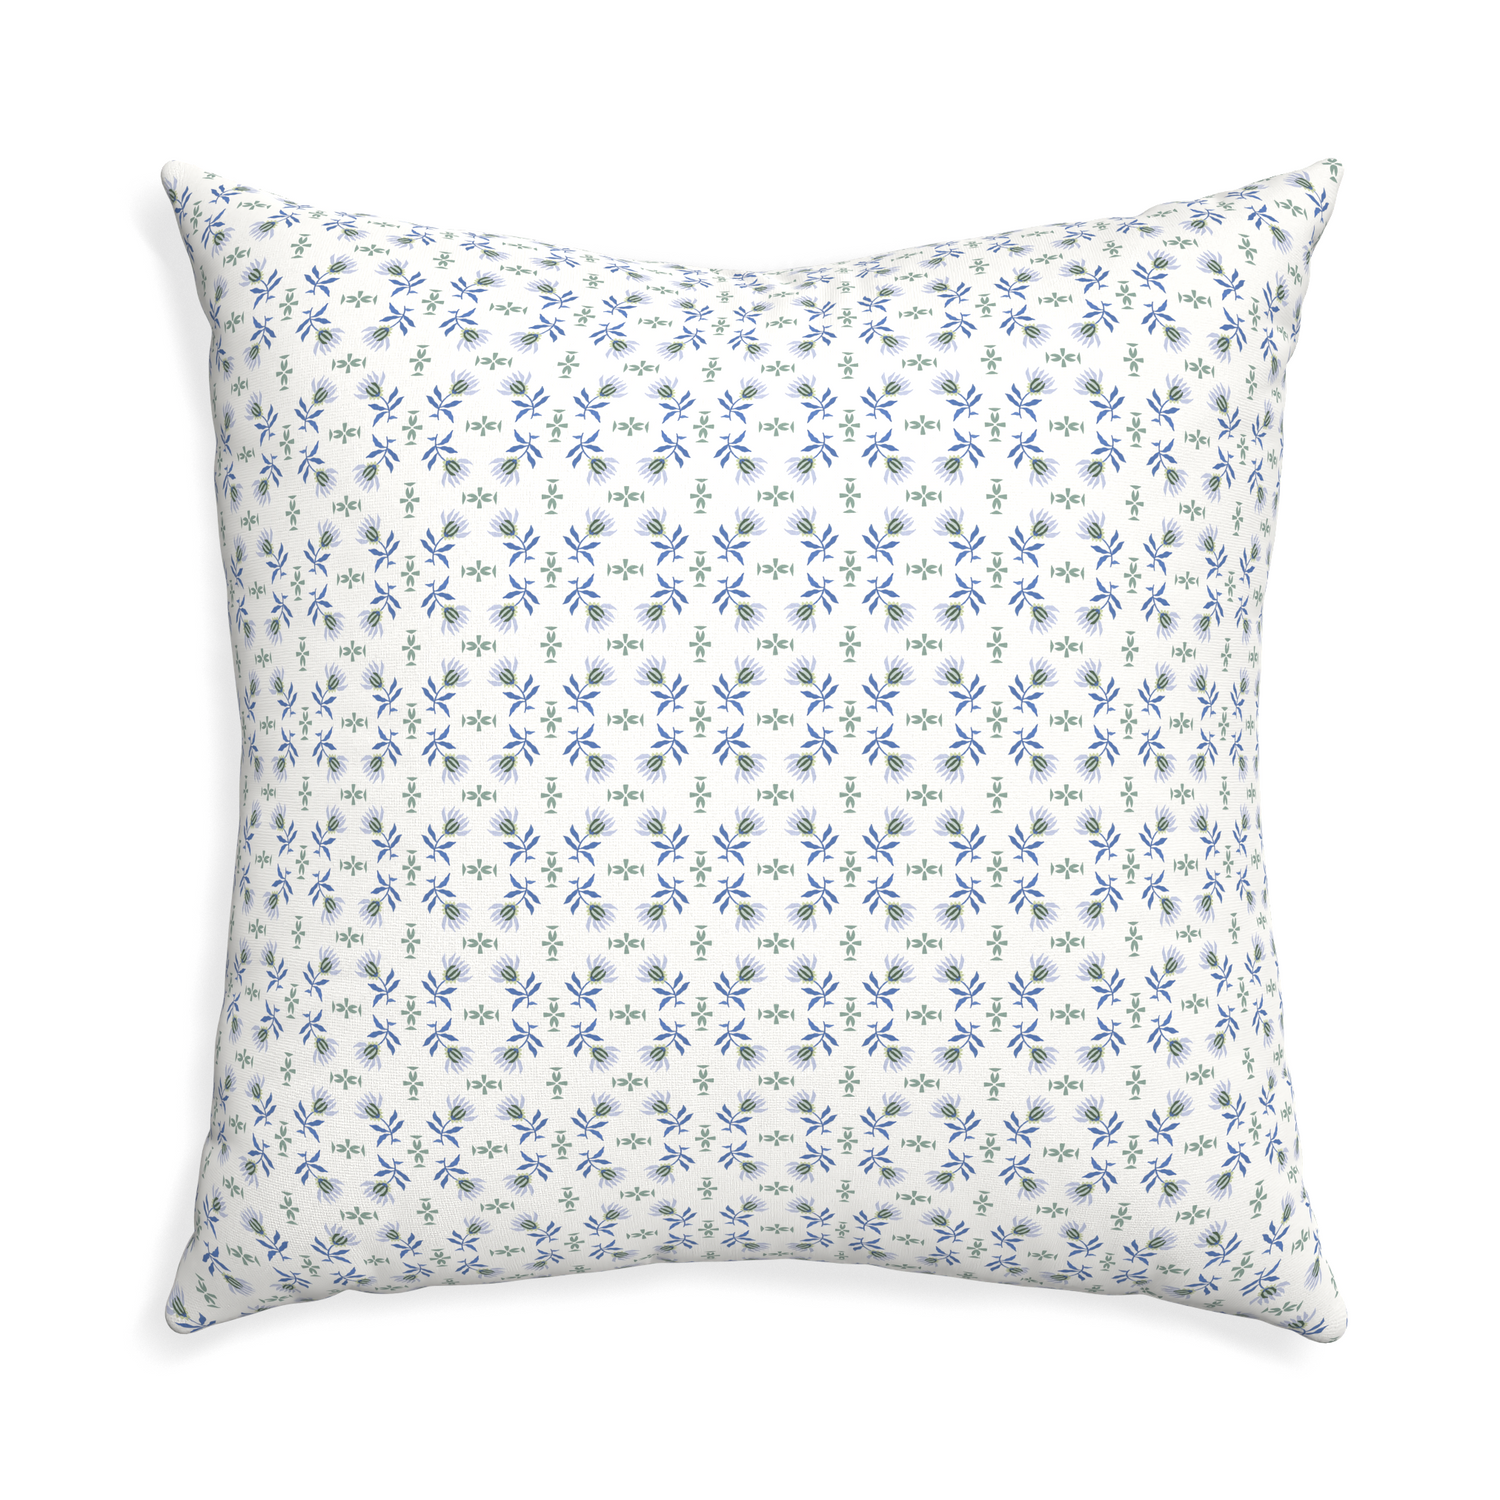 Euro-sham lee custom blue & green floralpillow with none on white background